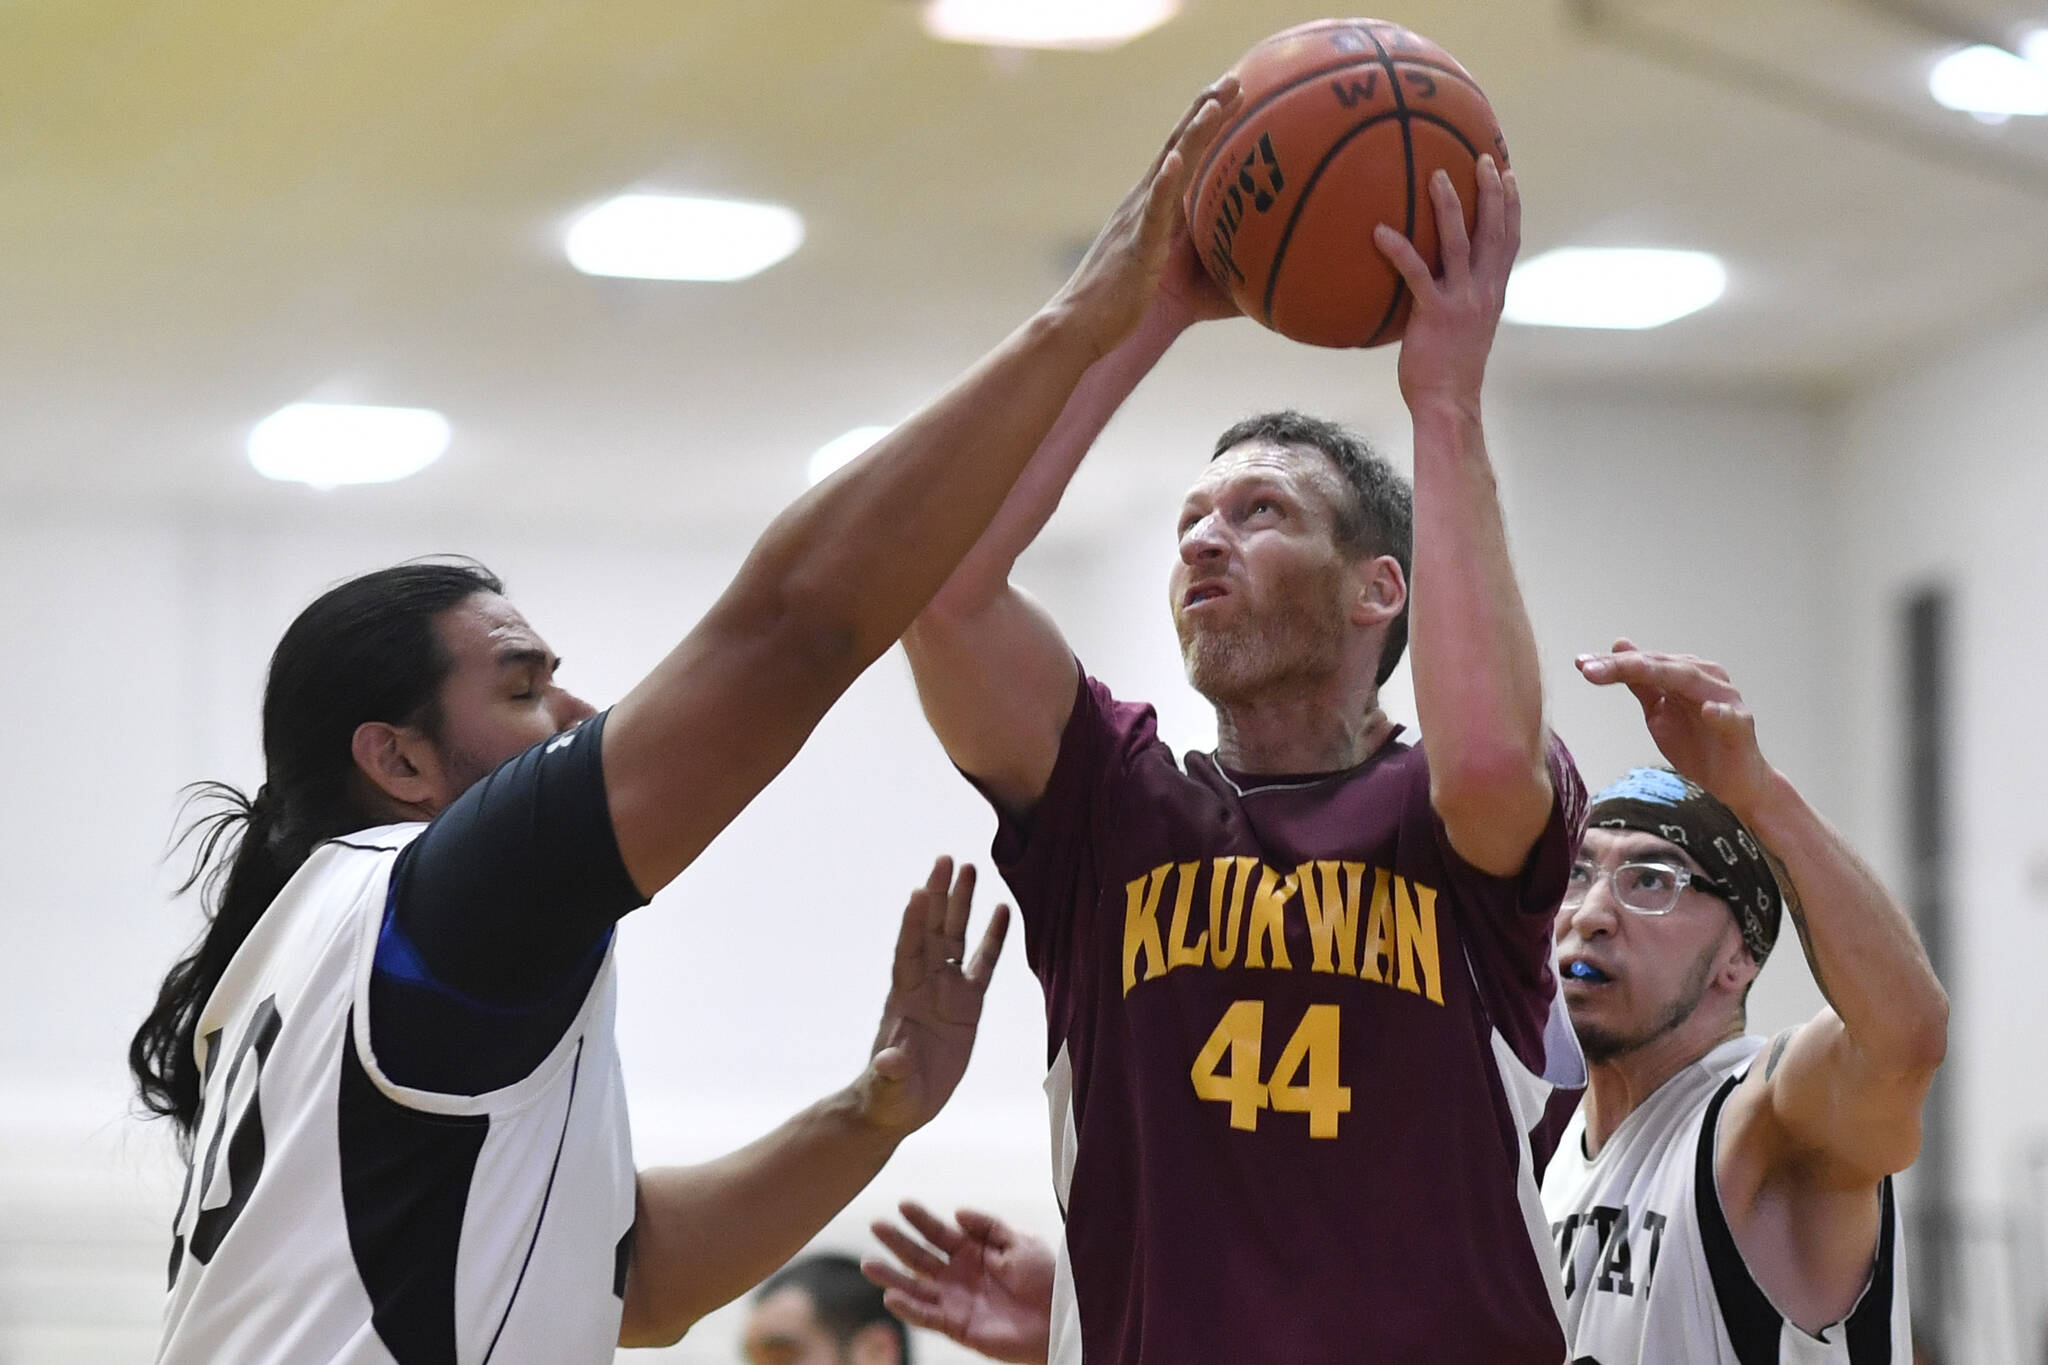 Klukwan’s Andrew Friske, center, shoots against Yakutat’s Derek James, left, at the Juneau Lions Club 73rd Annual Gold Medal Basketball Tournament at Juneau-Douglas High School: Yadaa.at Kalé on Tuesday, March 19, 2019. This year’s tournament starts on Sunday, March 19-25 at JDHS. (Michael Penn | Juneau Empire File)